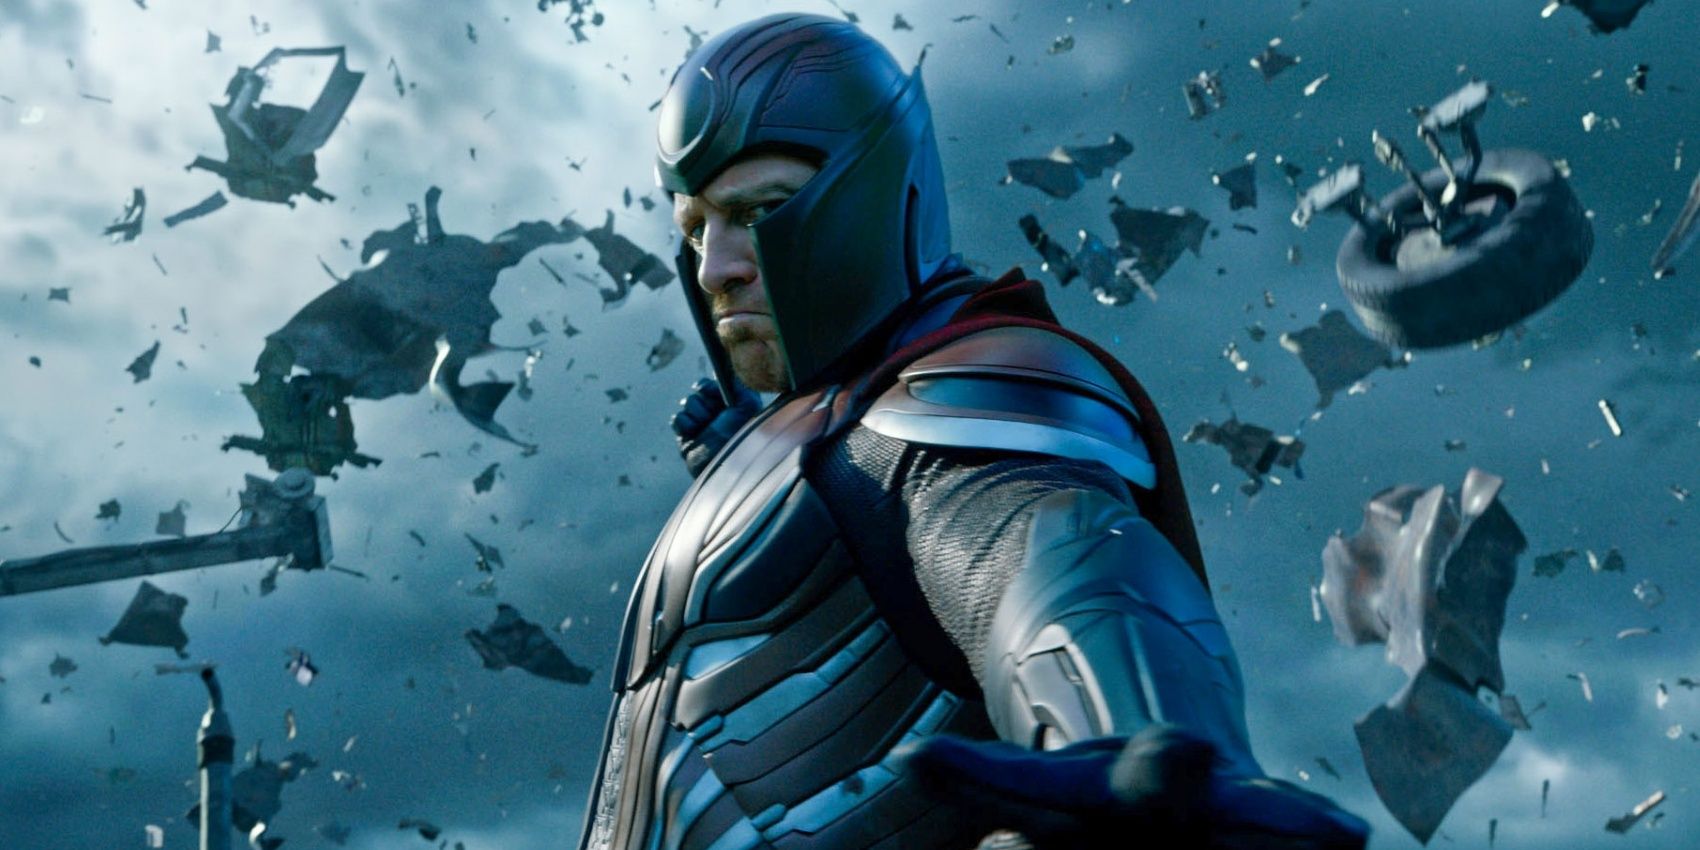 Magento flexing his awesome power in X-Men Apocalypse